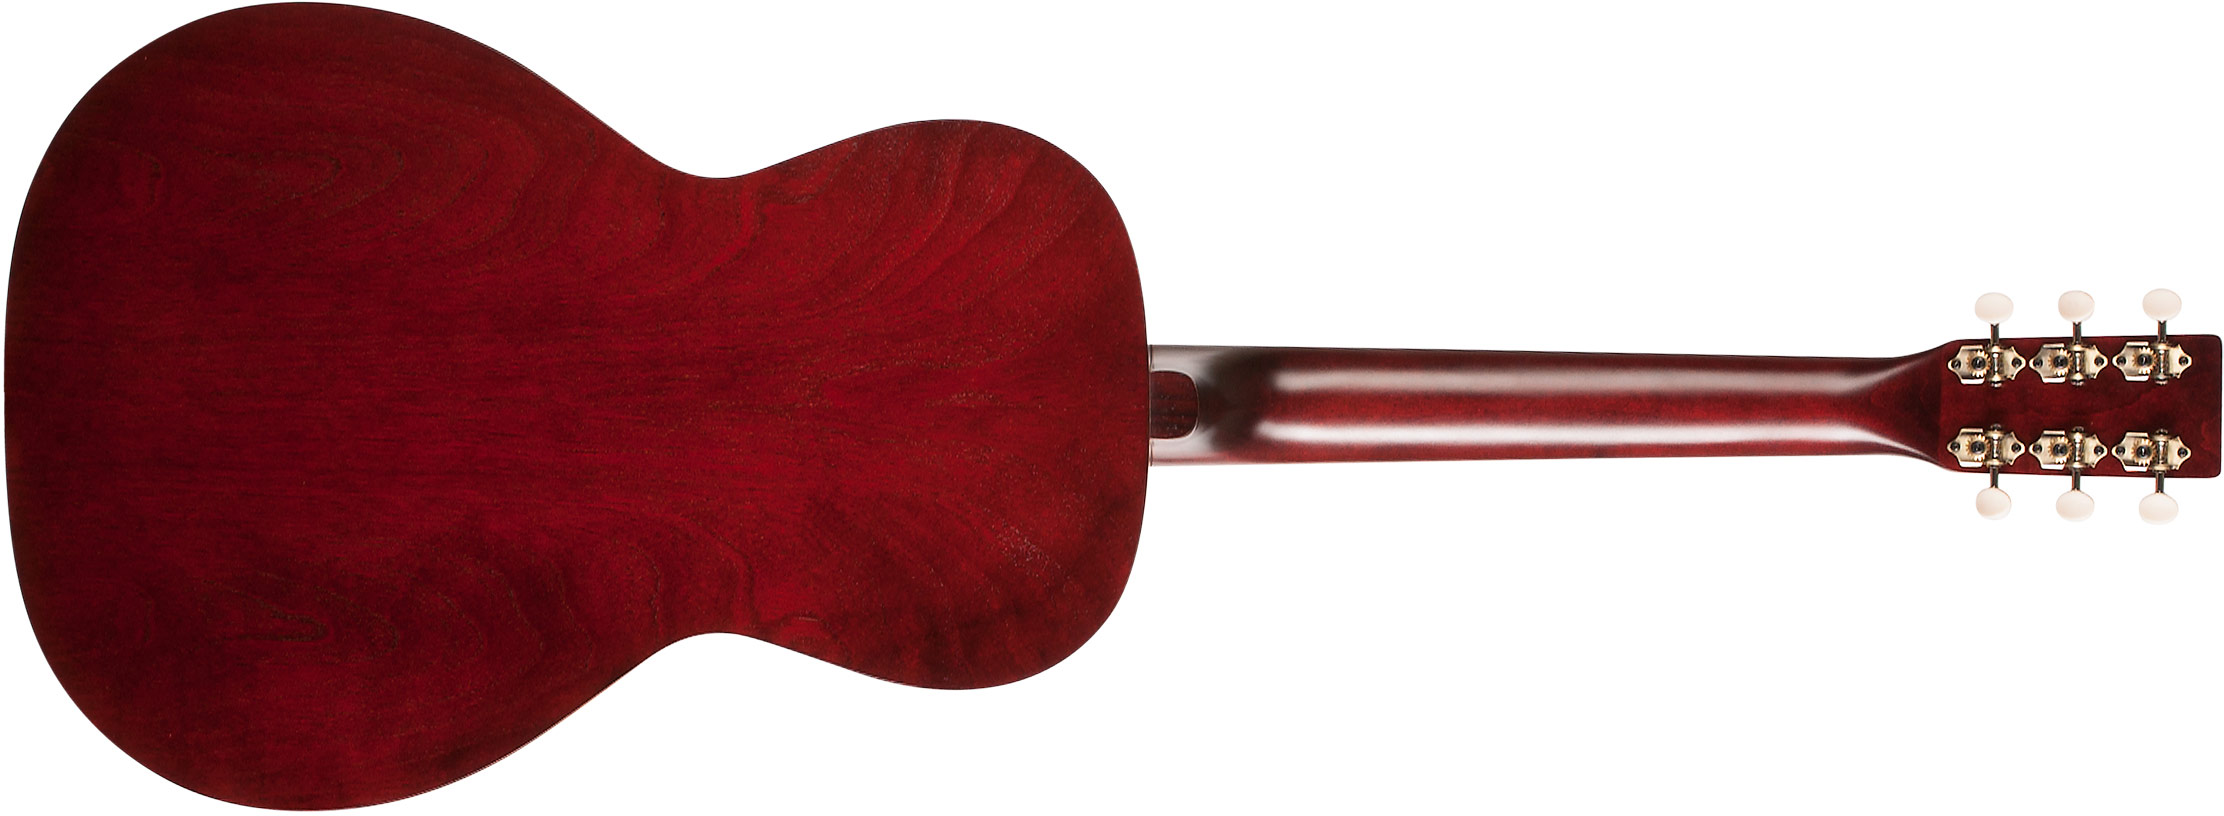 Art Et Lutherie Roadhouse Parlor A/e Epicea Merisier Rw - Tennessee Red - Guitarra electro acustica - Variation 1